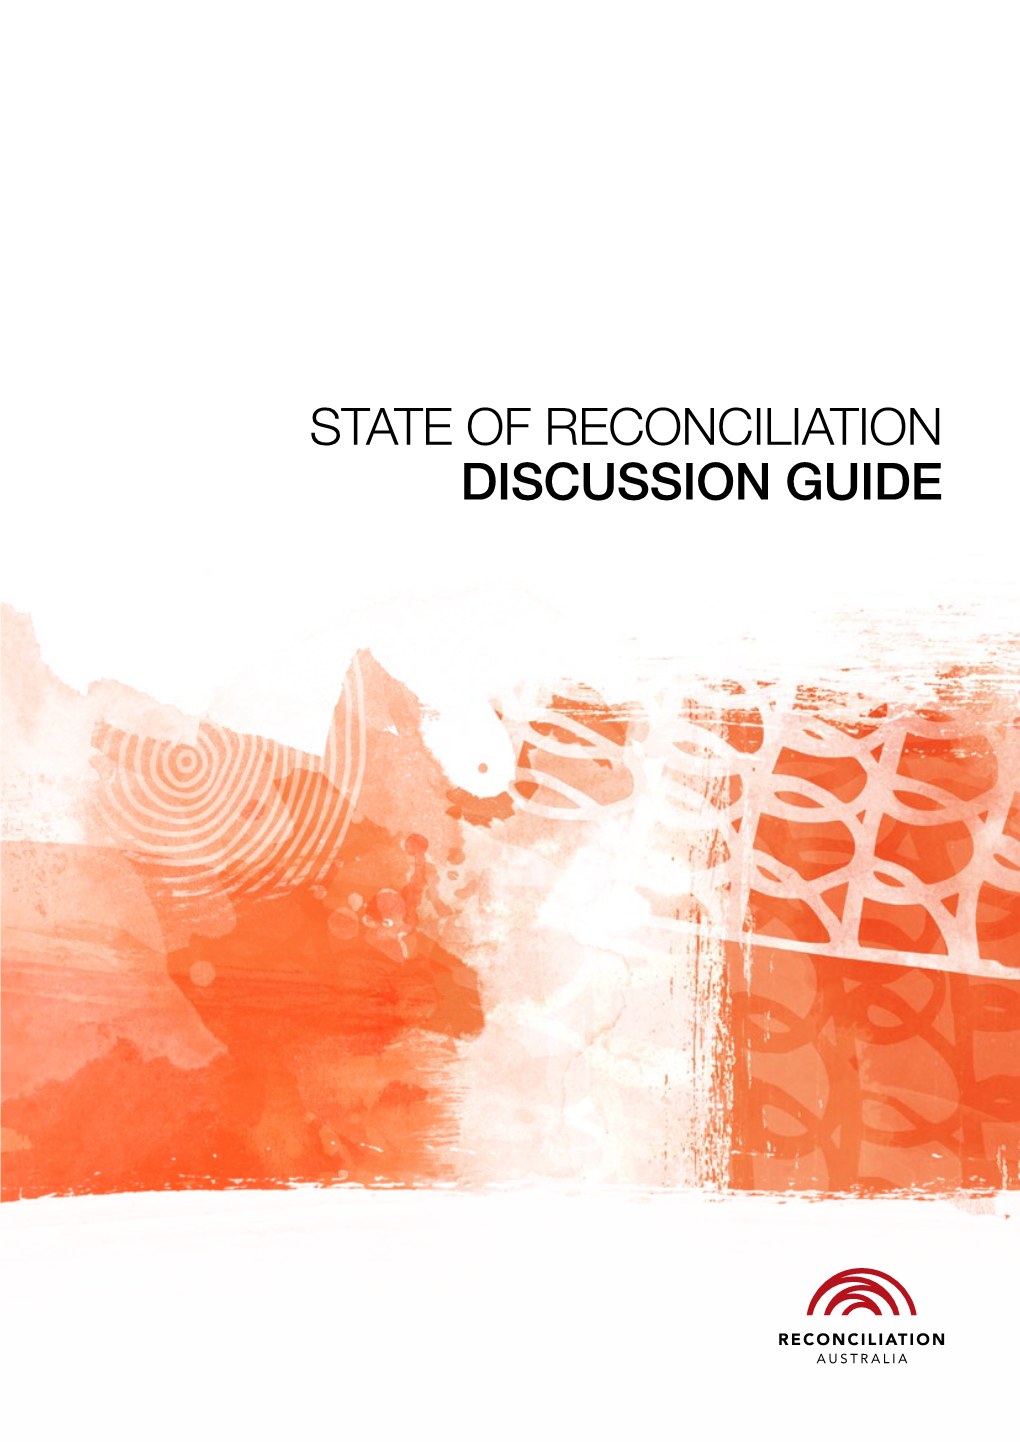 State of Reconciliation Discussion Guide Contents